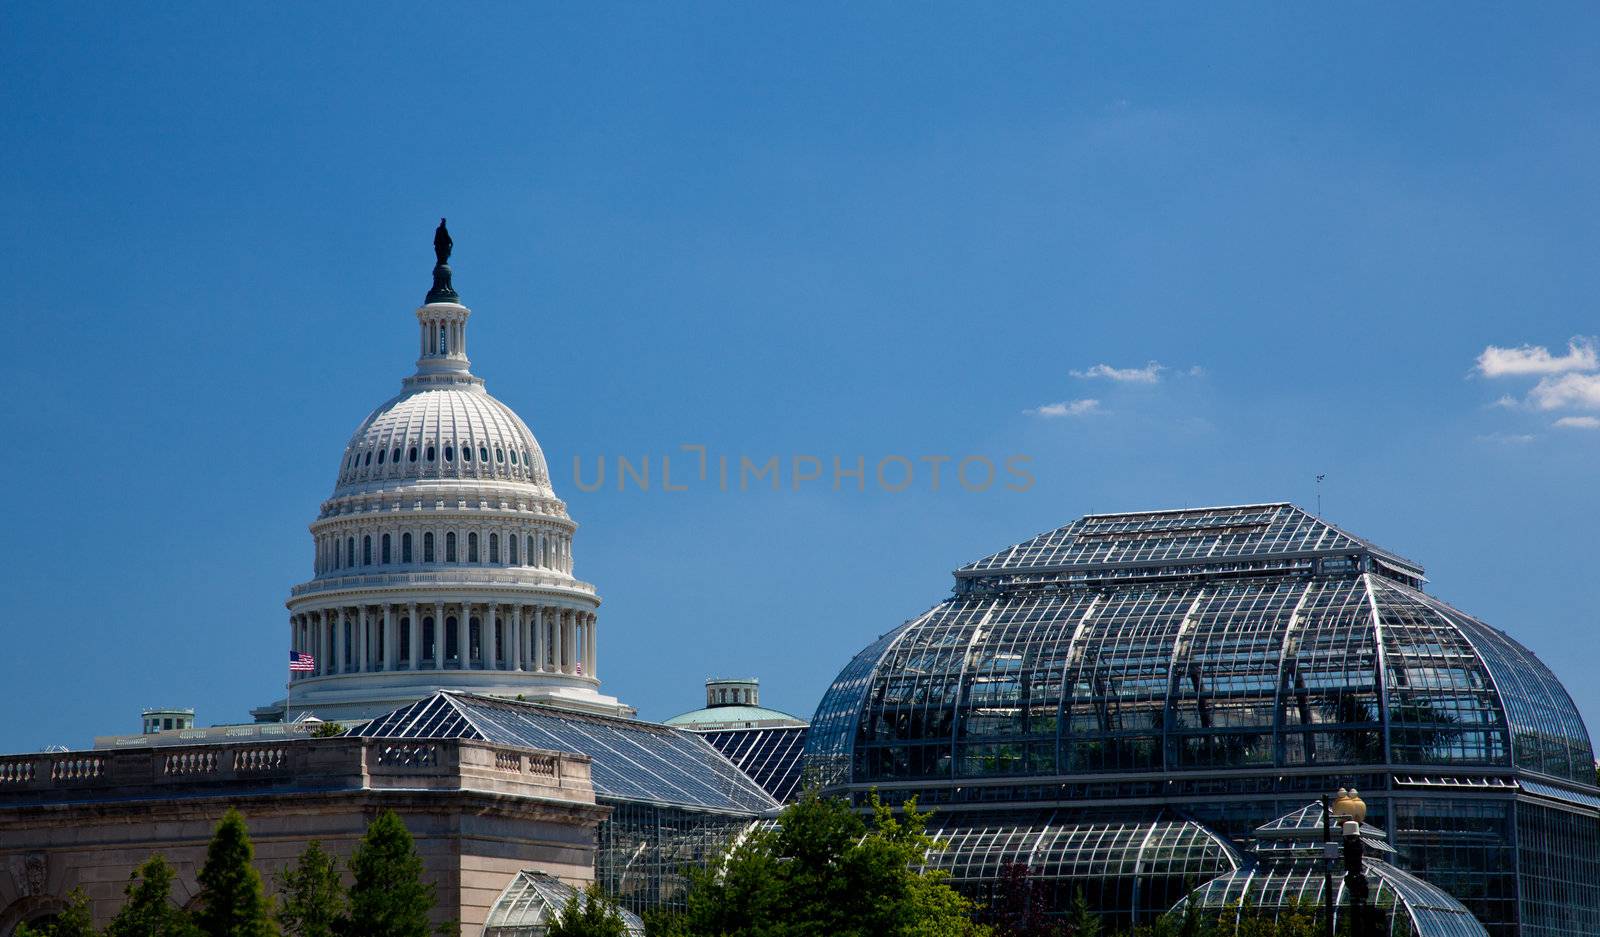 Capitol Building framed by Botanic Gardens by steheap